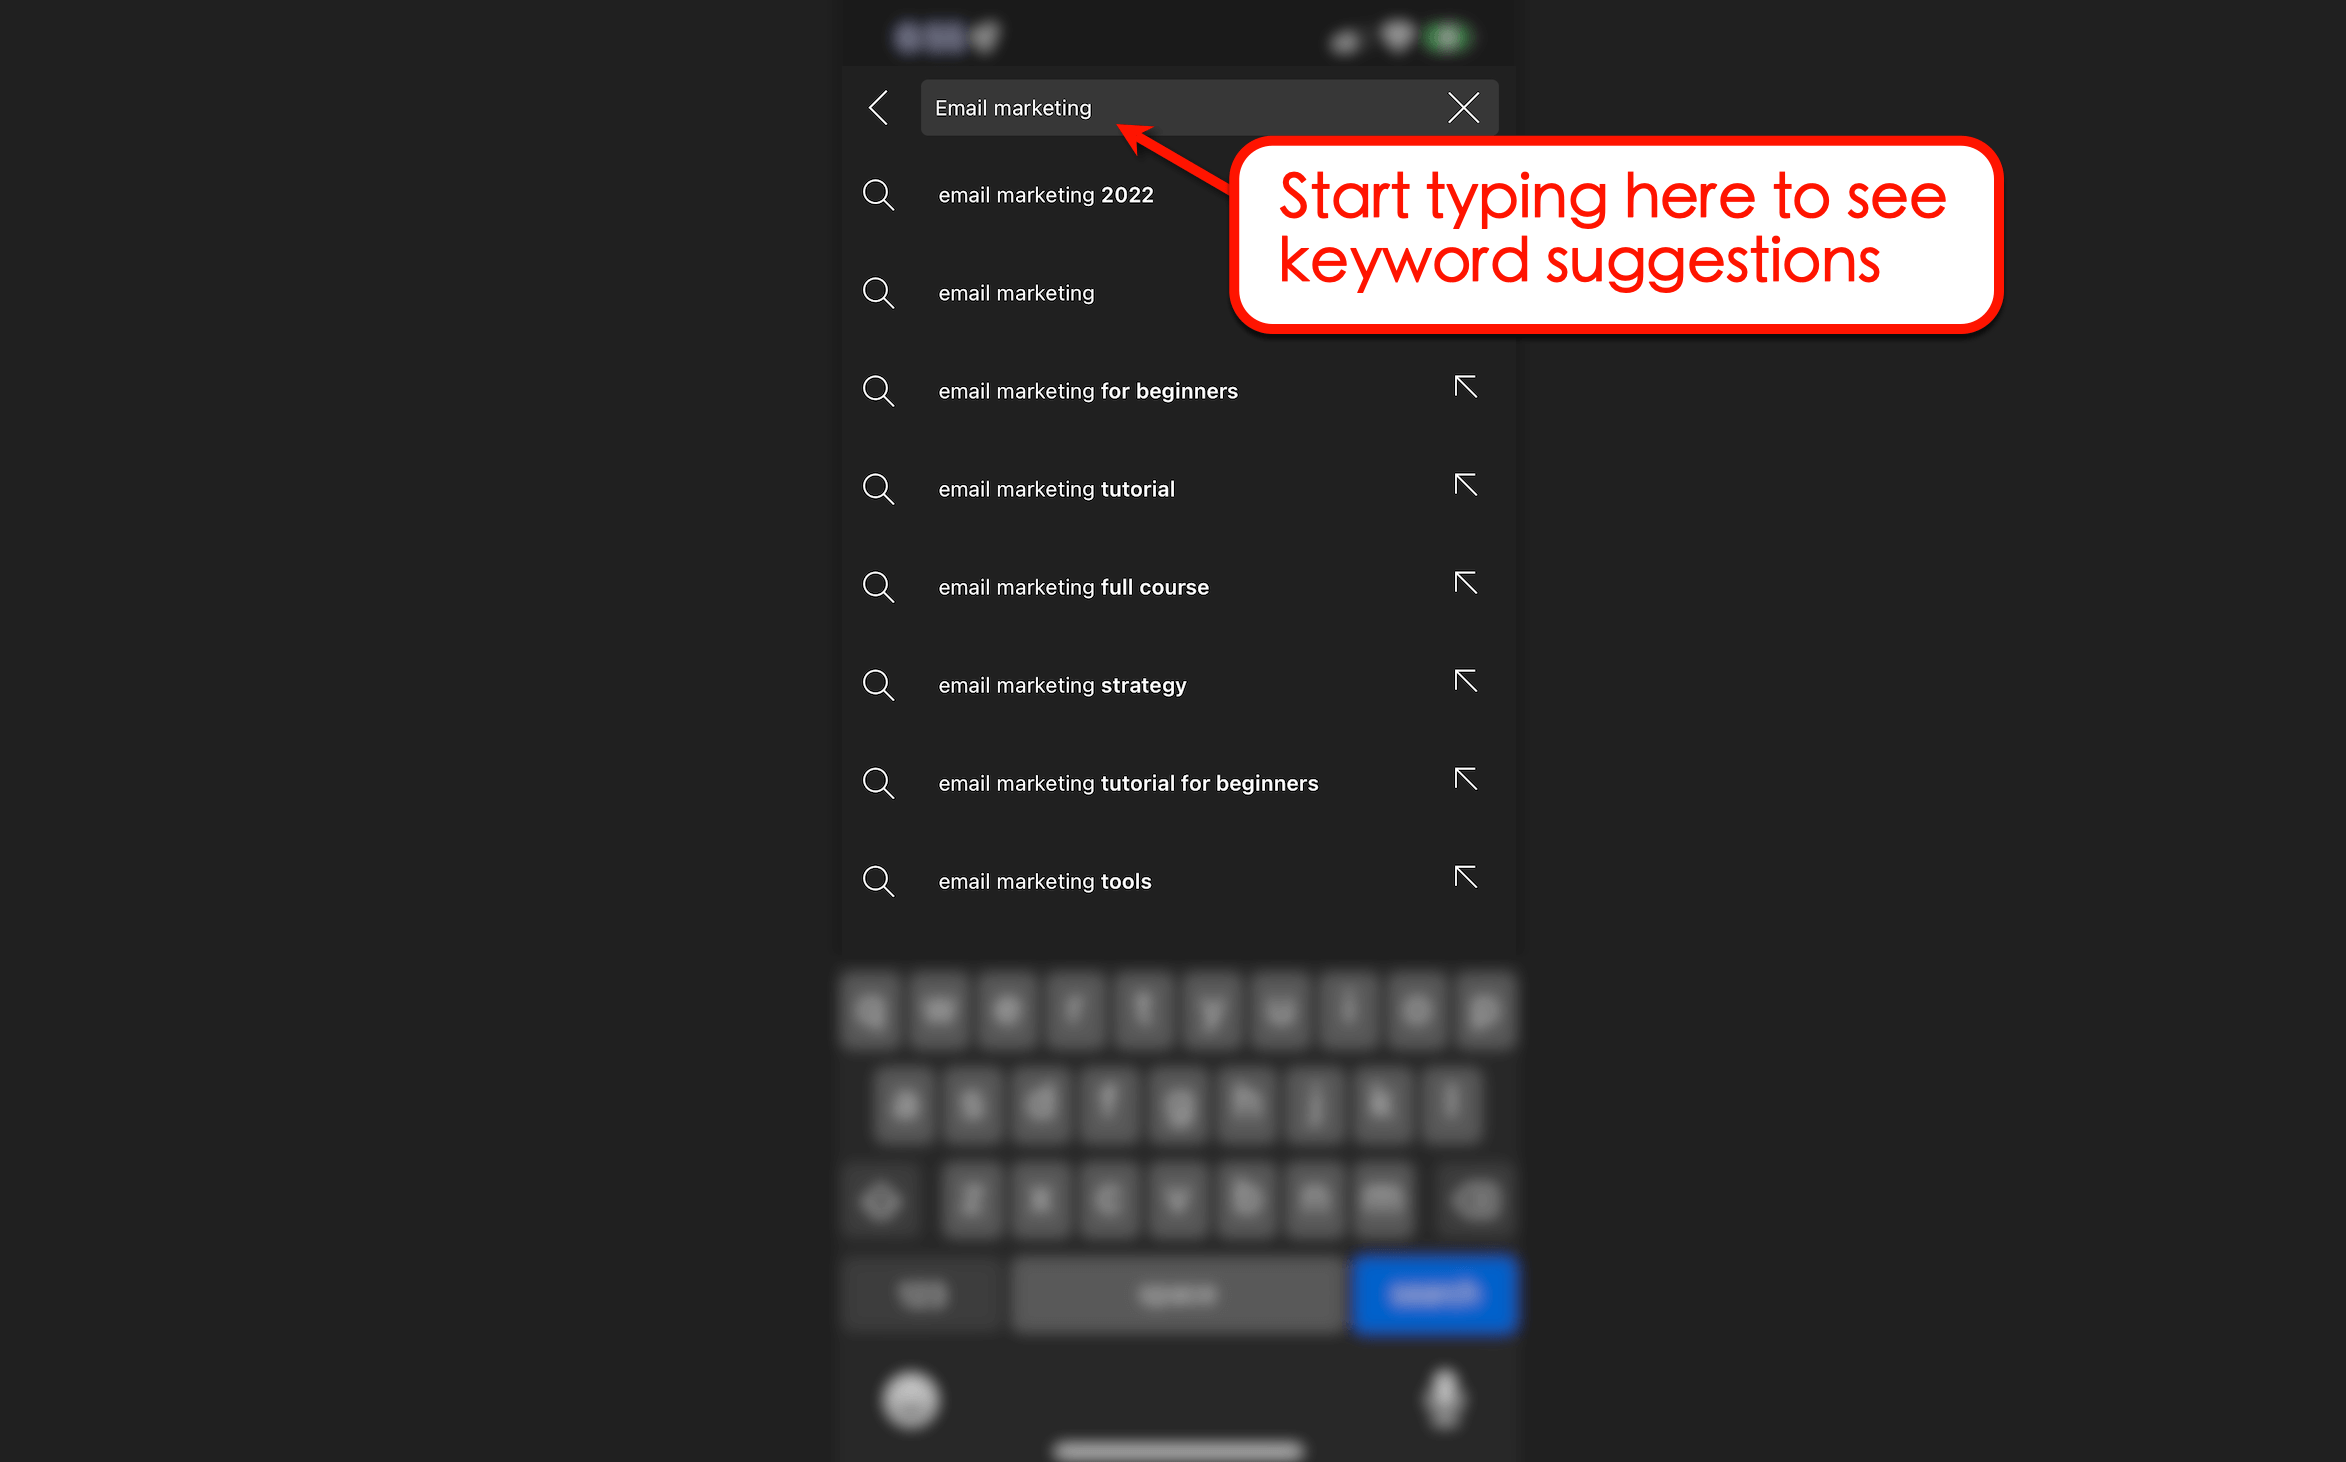 Start typing to see keyword suggestions in Youtube app